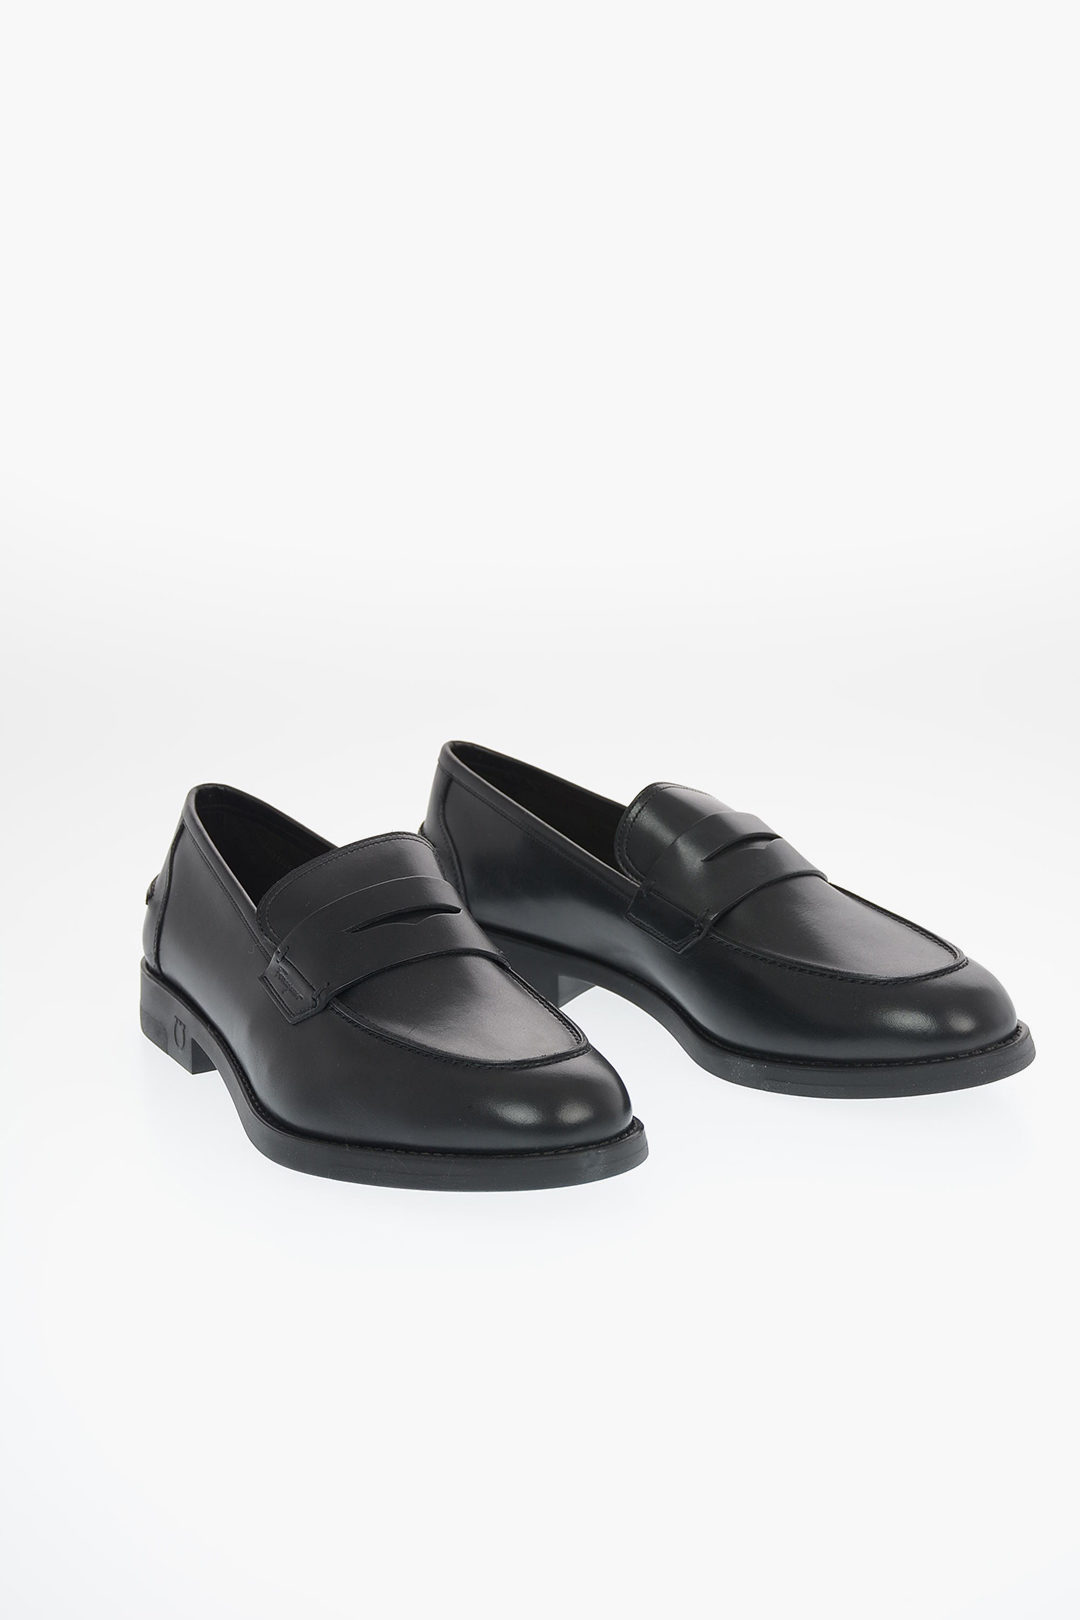 Salvatore Ferragamo Leather AYDEN Penny Loafers men - Glamood Outlet